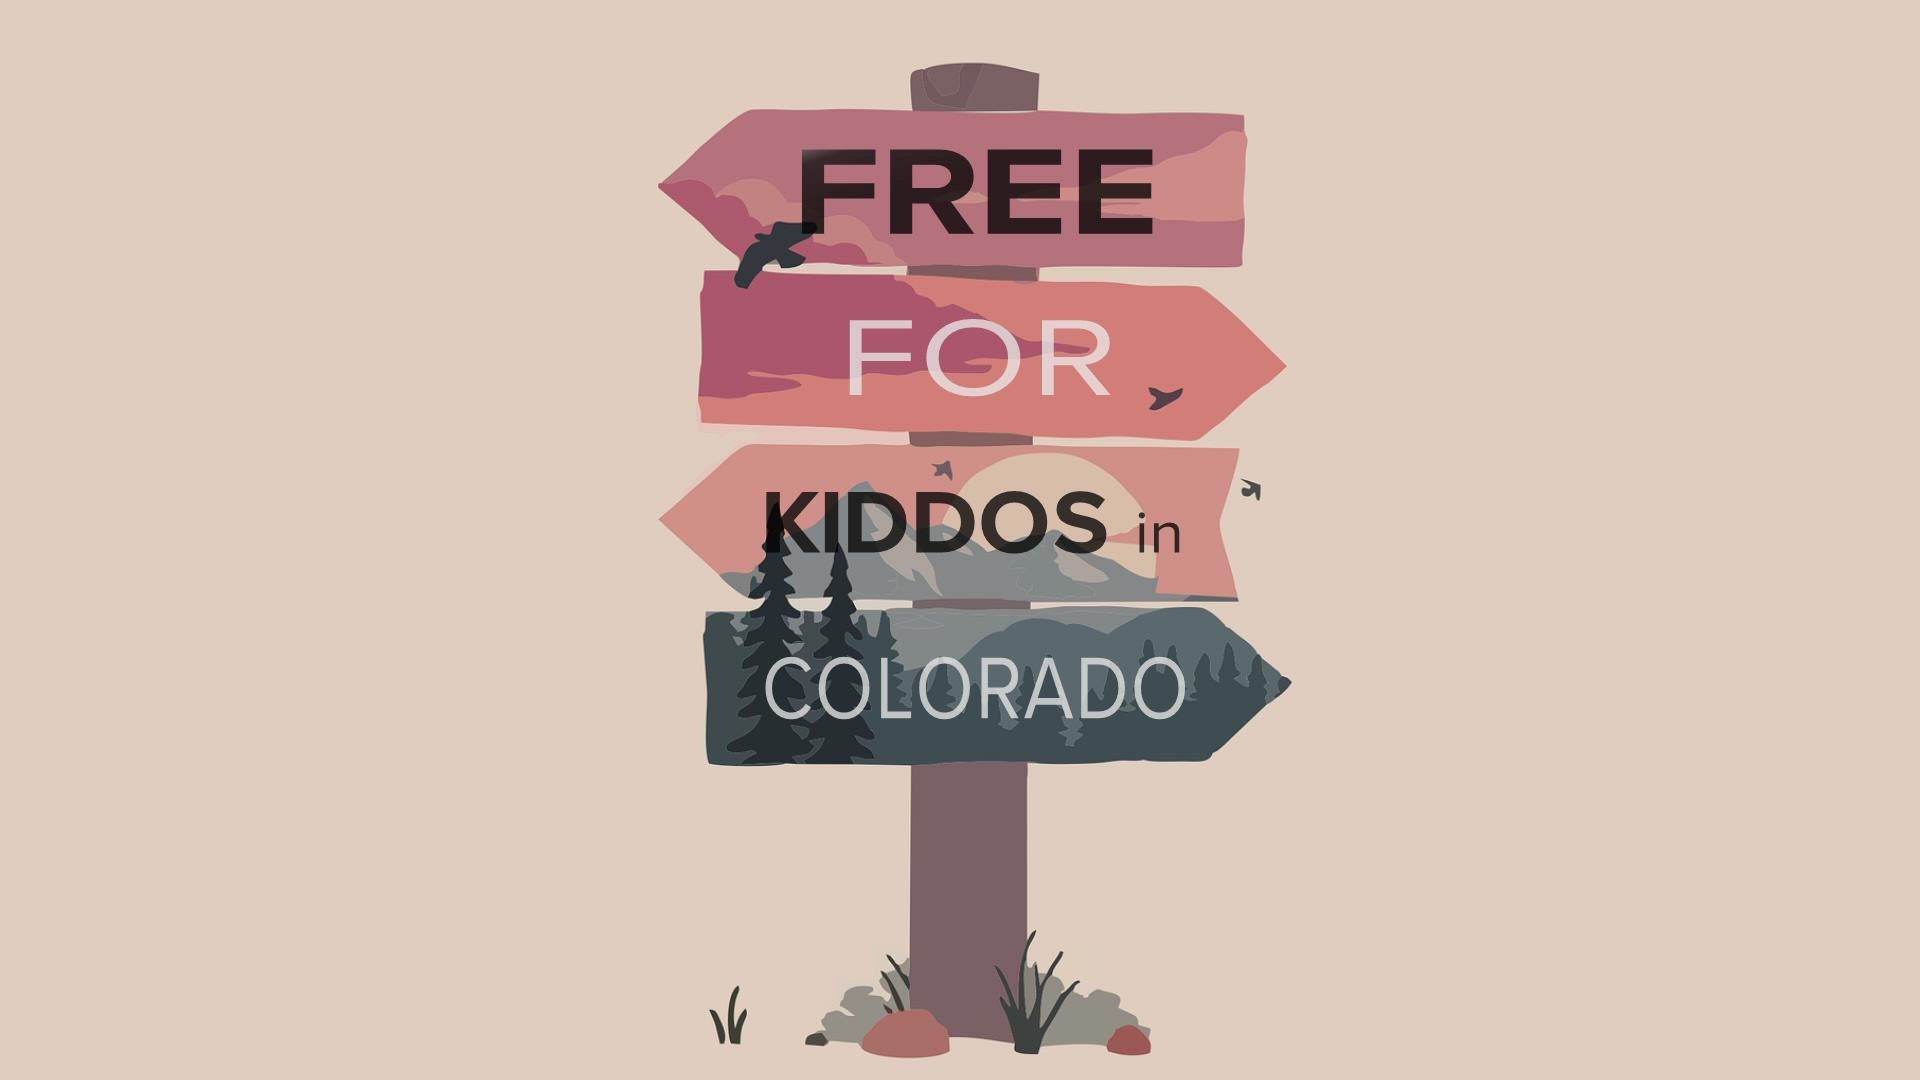 Are you ready for the weekend? Here are some fun, free, family-friendly events in Colorado from Aug. 26-28, 2022. Have an awesome weekend!